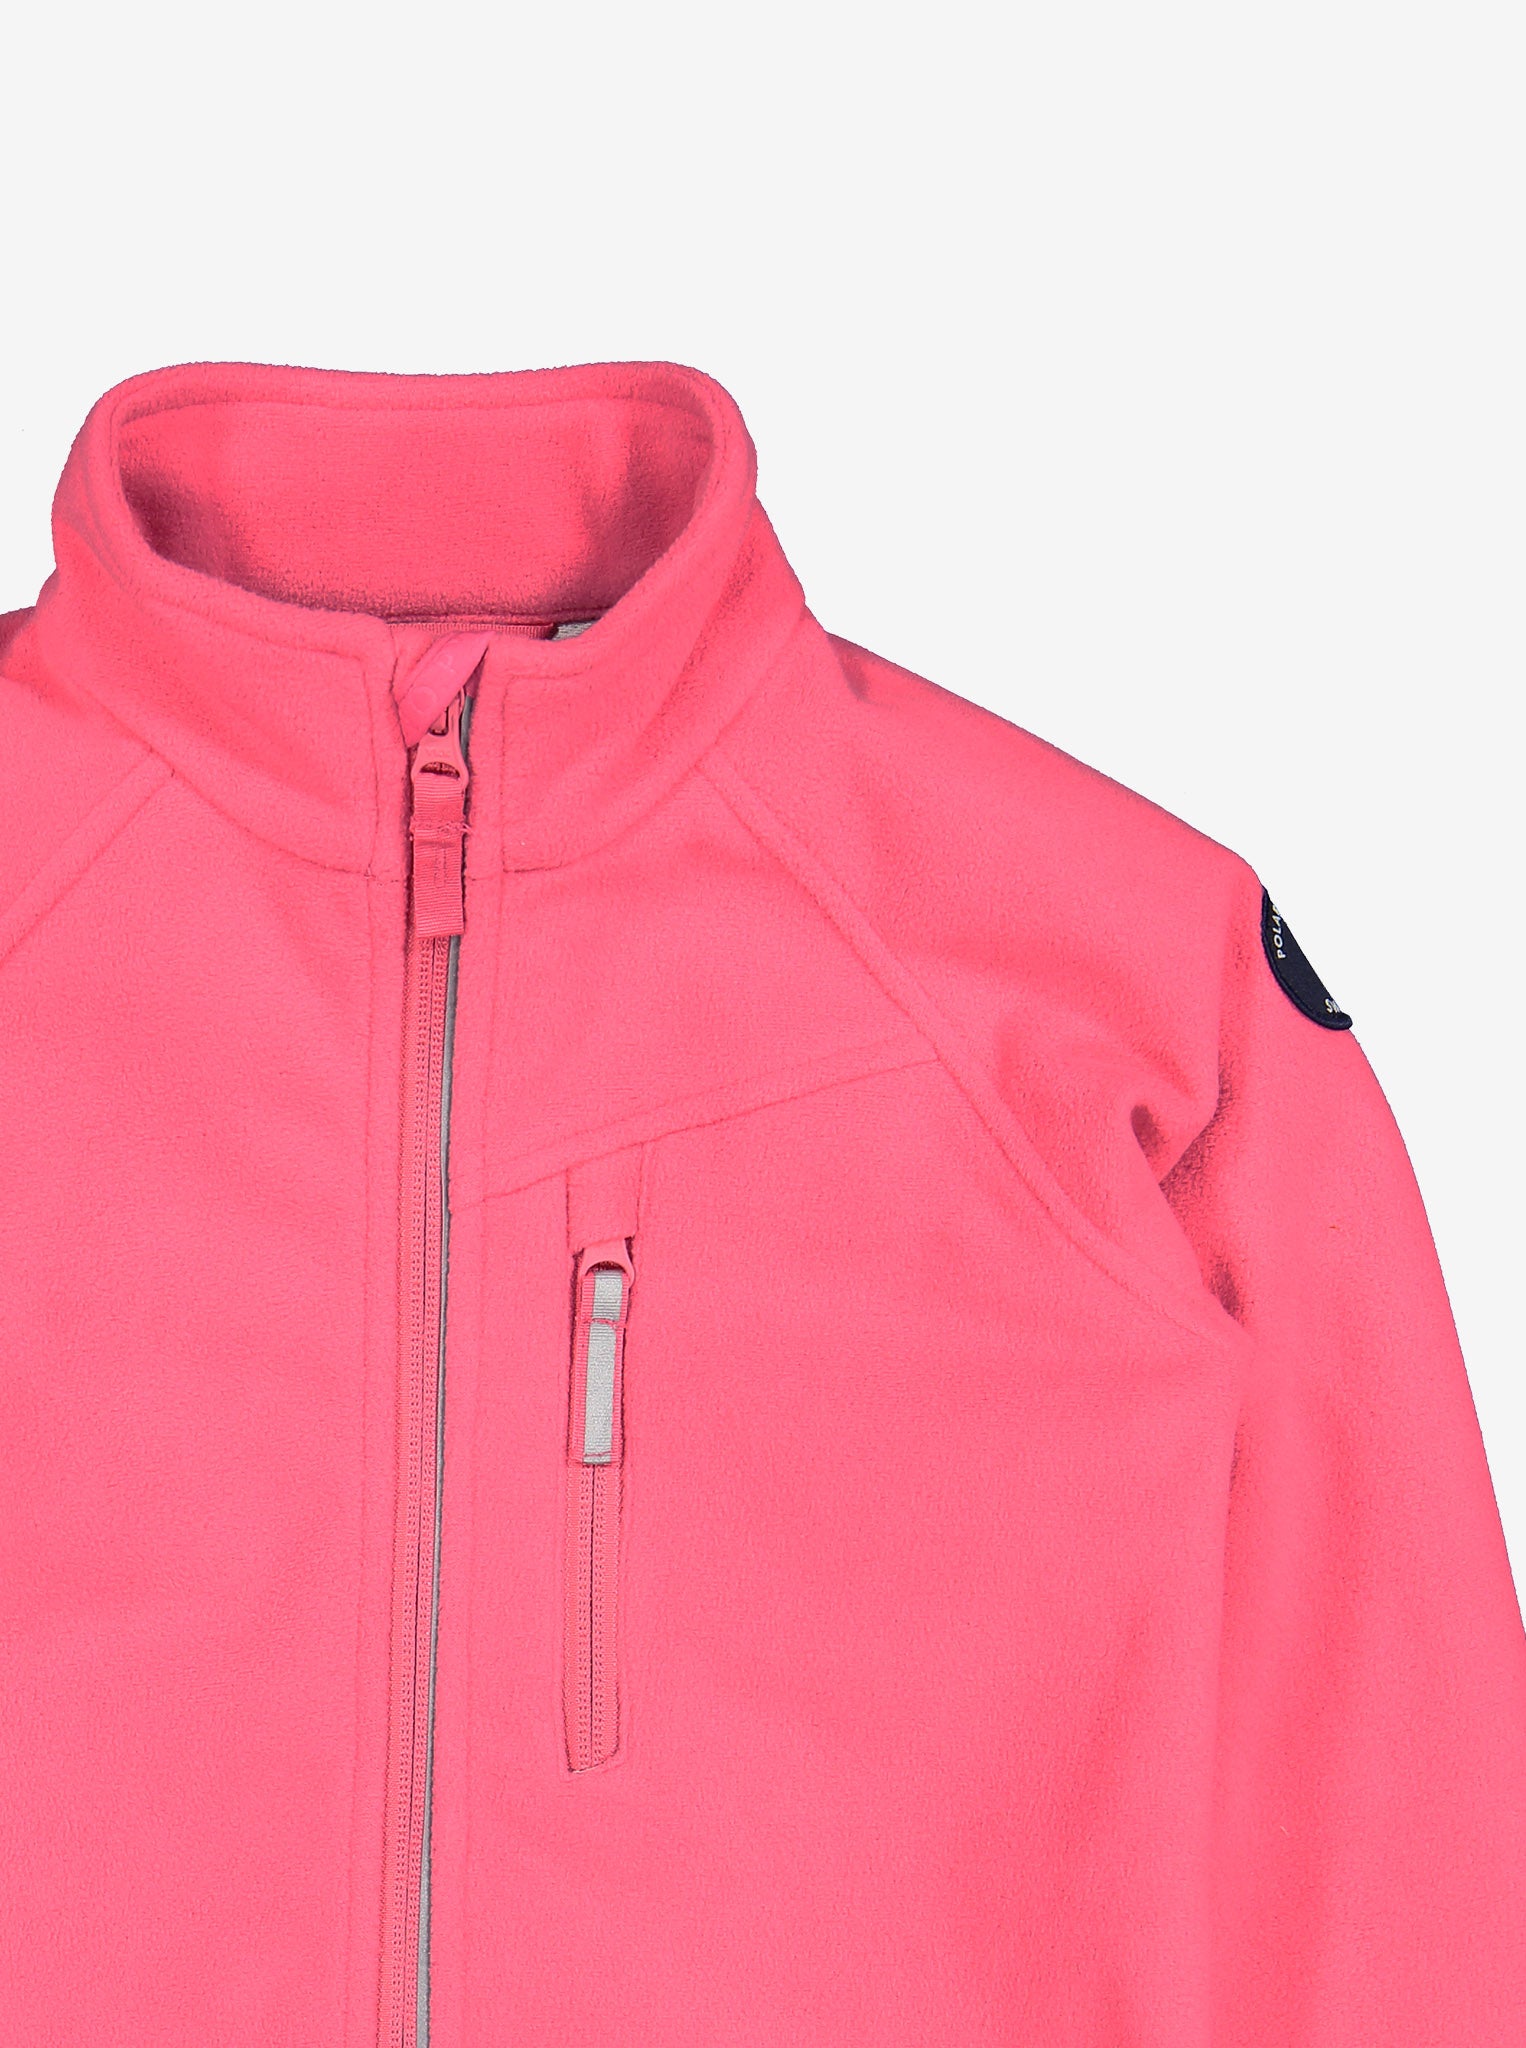 Close up shot of pink, kids waterproof fleece jacket made of breathable fabric, with reflector zip and front pocket.